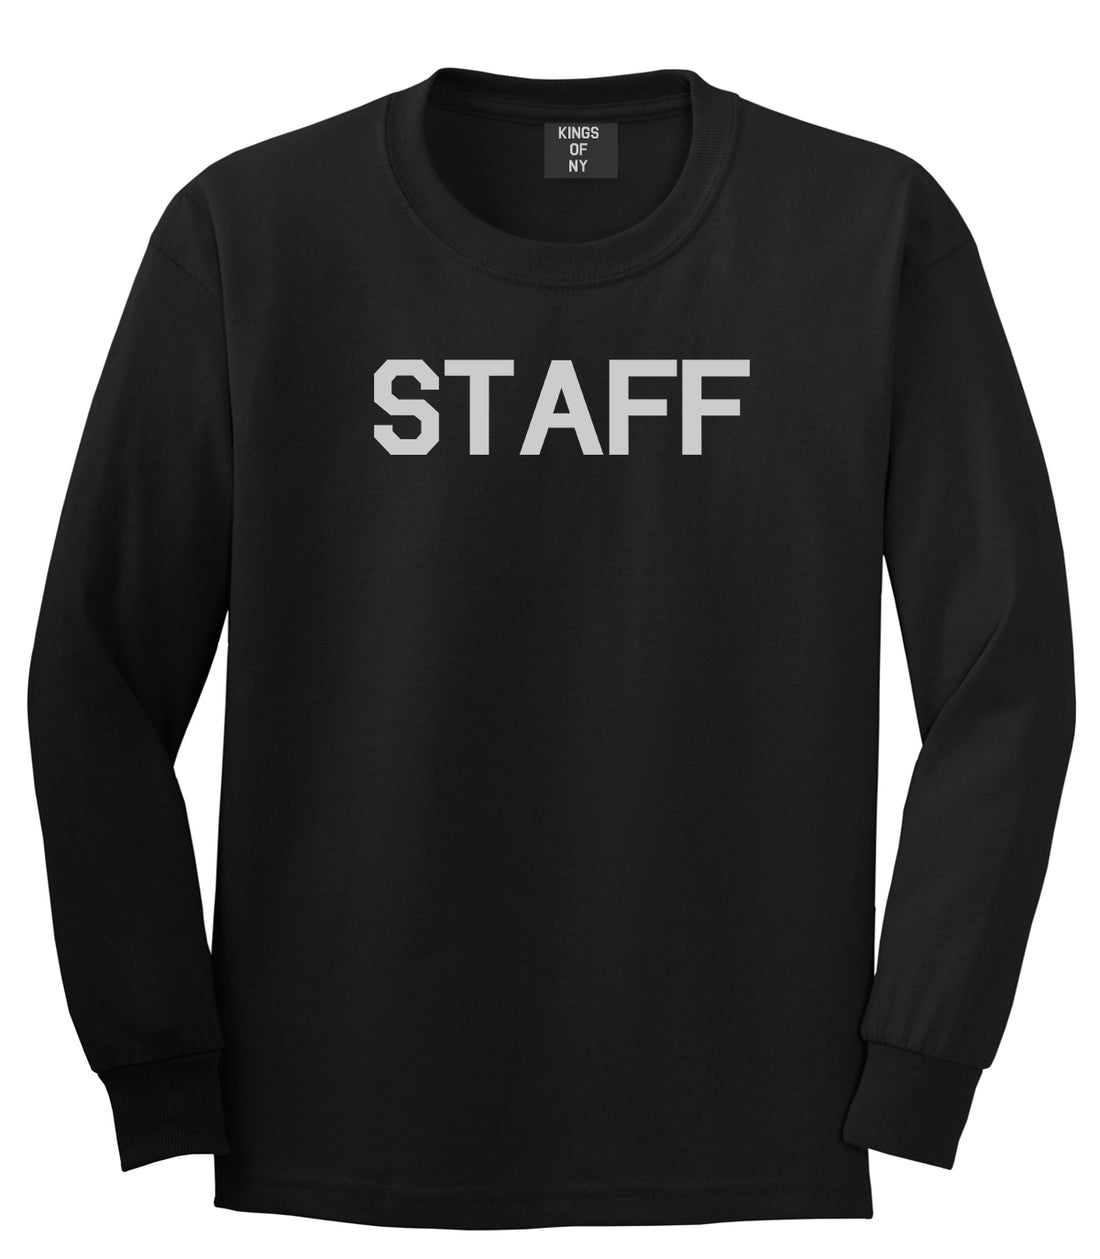 Staff Club Concert Event Mens Black Long Sleeve T-Shirt by KINGS OF NY